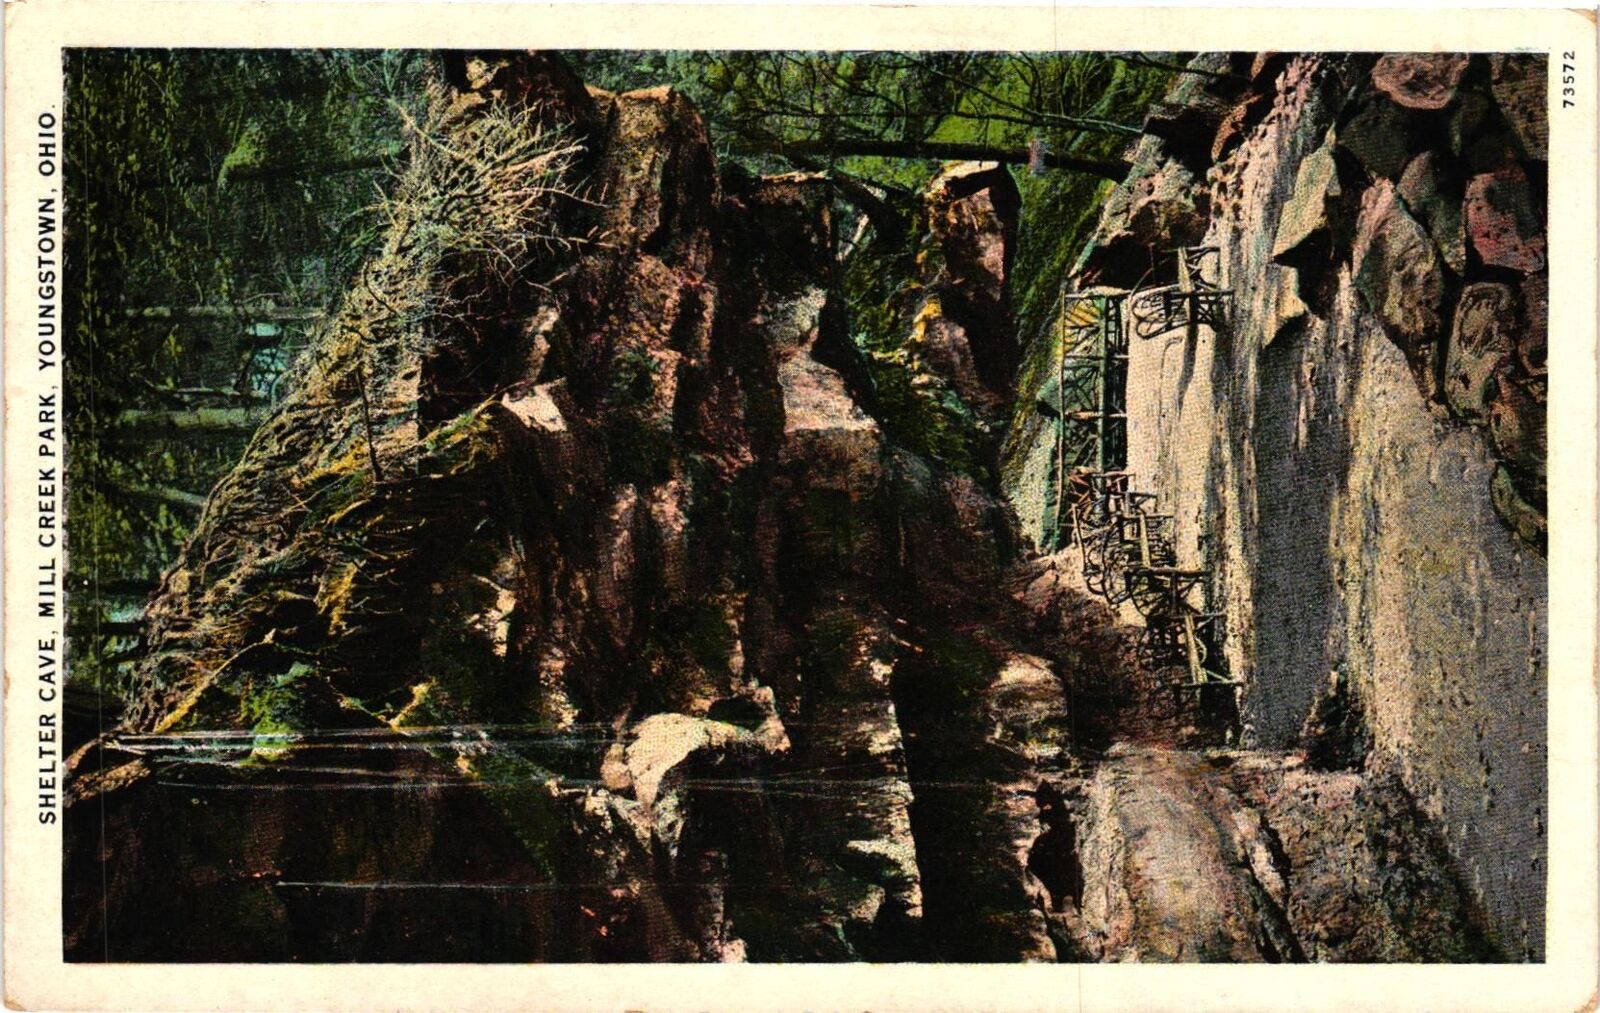 Vintage Postcard- SHELTER CAVE, MILL CREEK PARK, YOUNGSTOWN, OH. Early 1900s